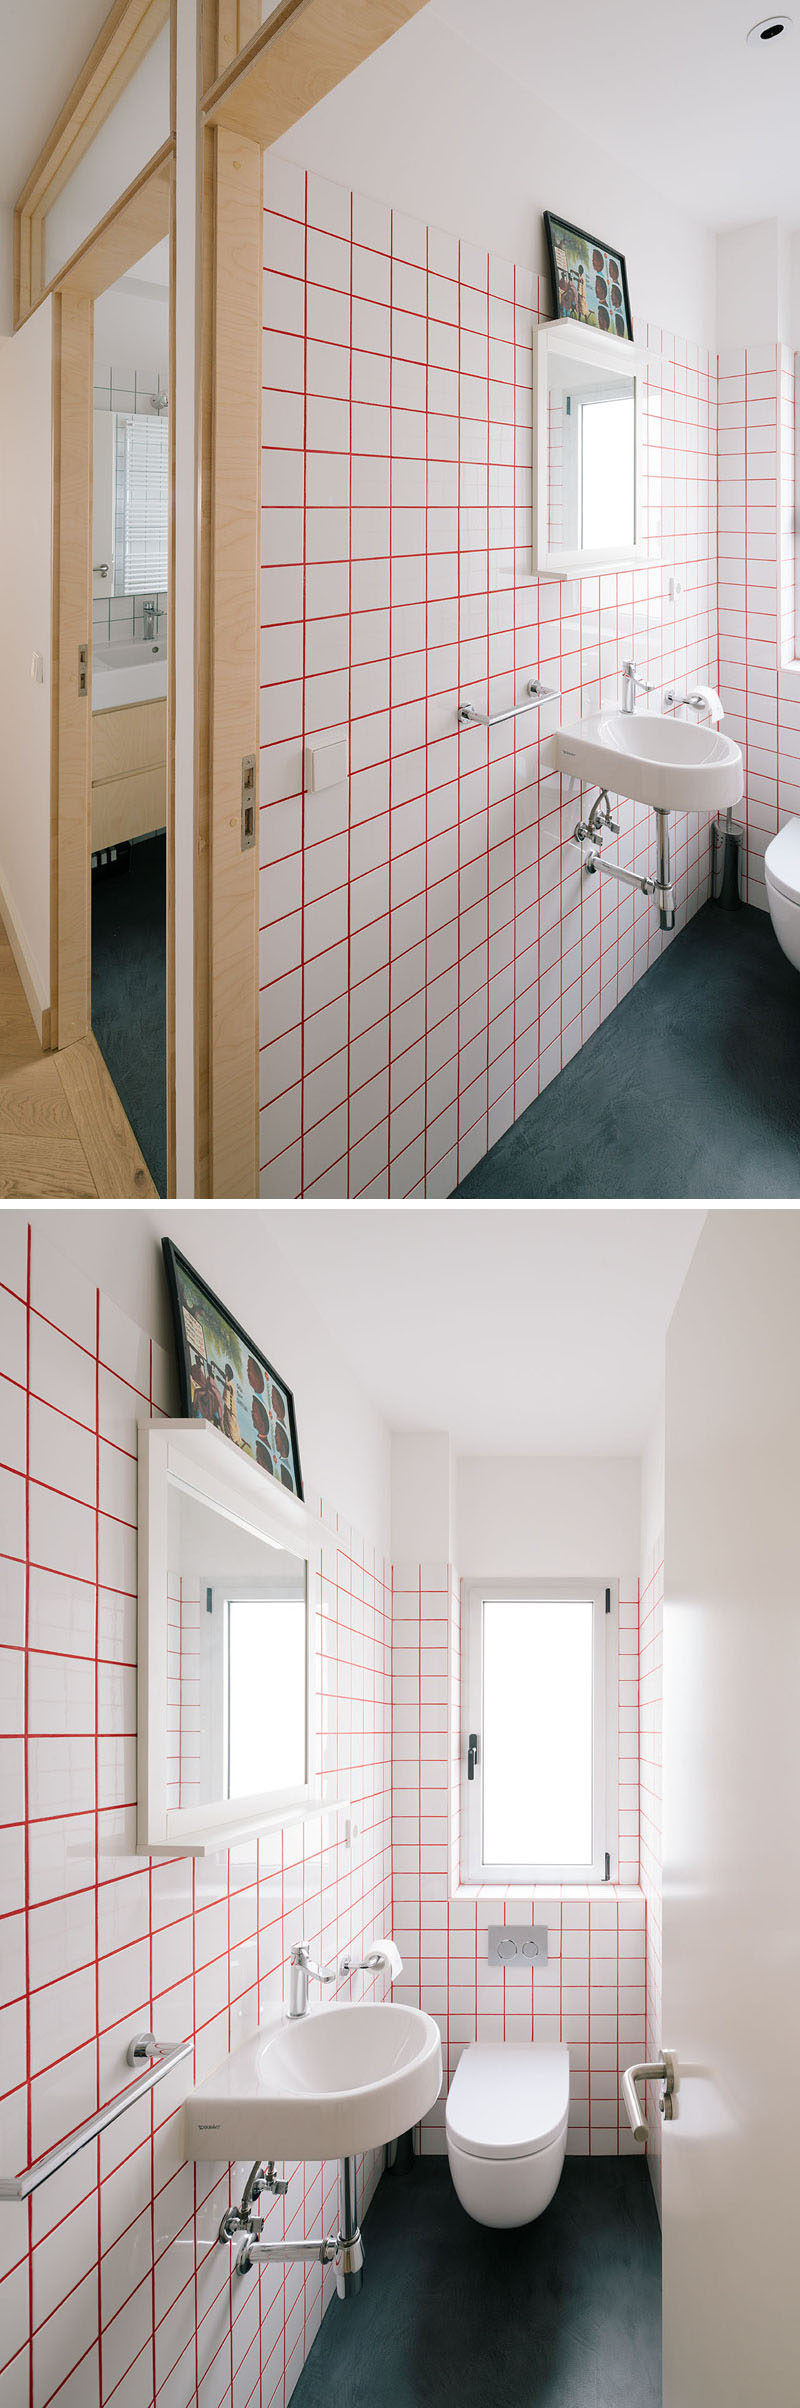 Bright red grout was used between square white tiles to brighten up this bathroom.